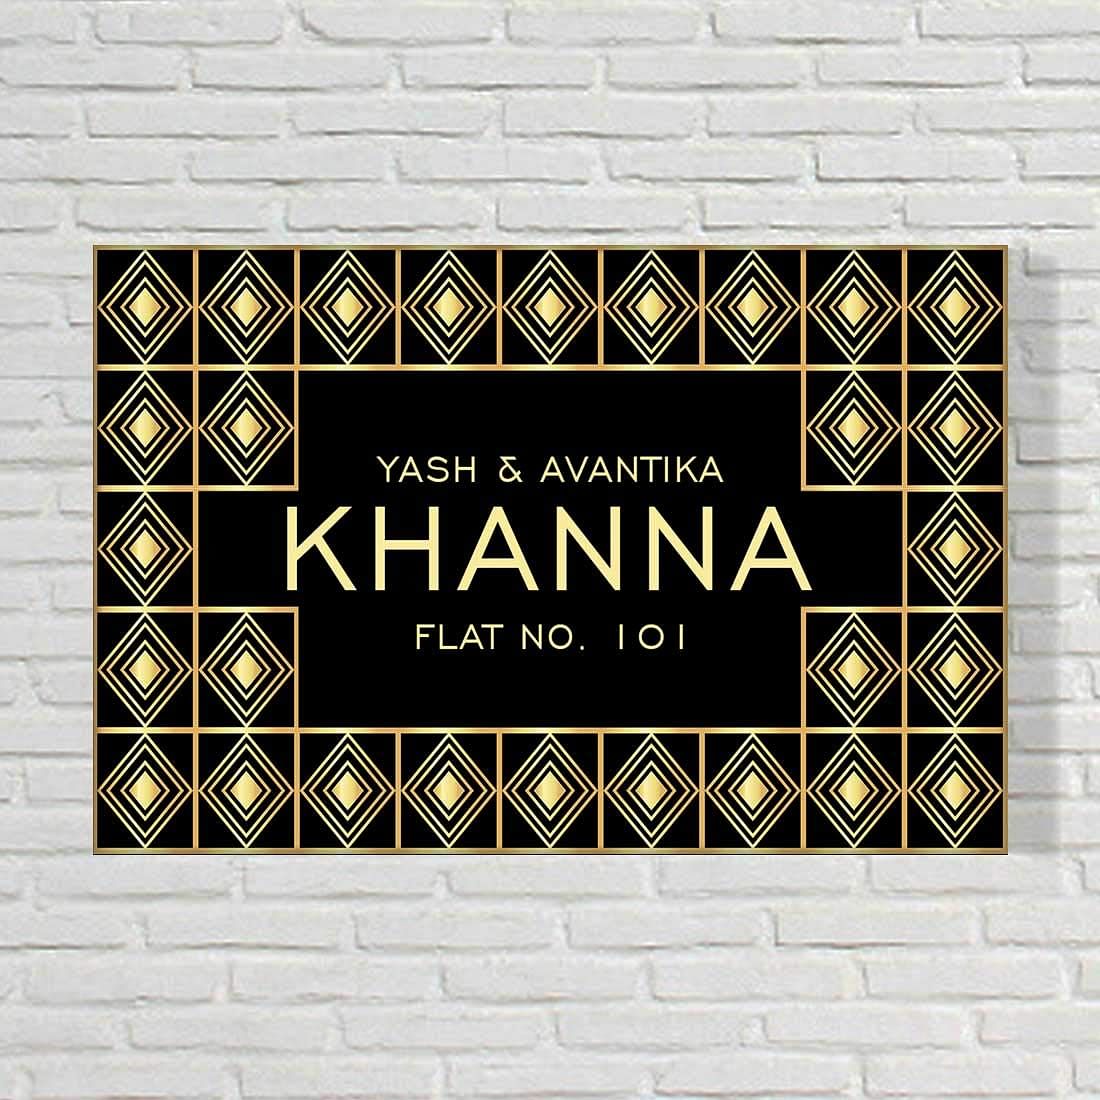 Buy name plates in srinagar. Designer engraved wooden signs. quick delivery